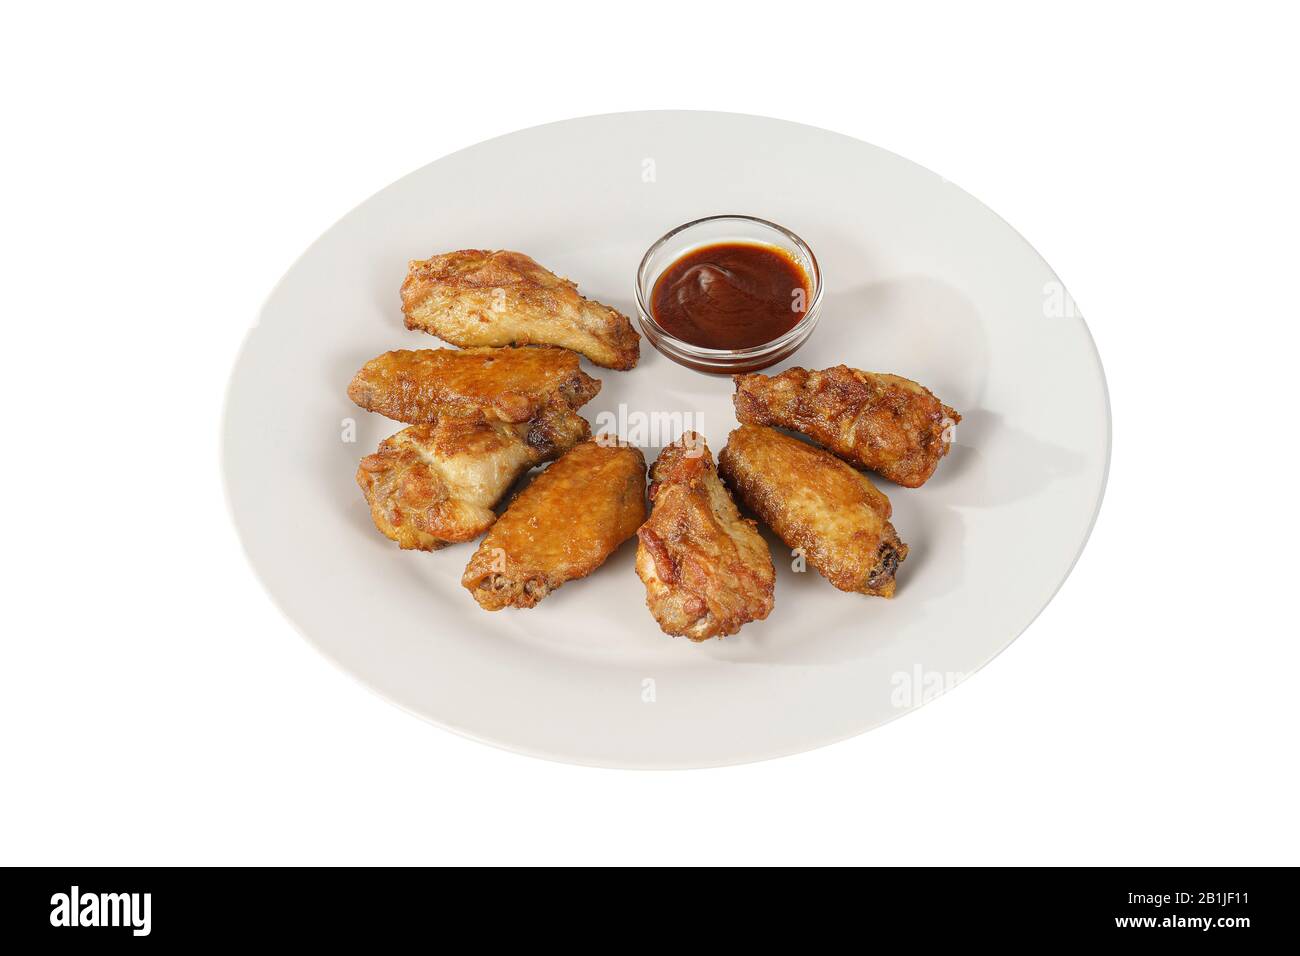 Hot appetizer chicken pieces, legs, wings, fried in oil, tomato sauce, ketchup, B-B-Q, before alcohol, on plate, white isolated background, Side view. Stock Photo